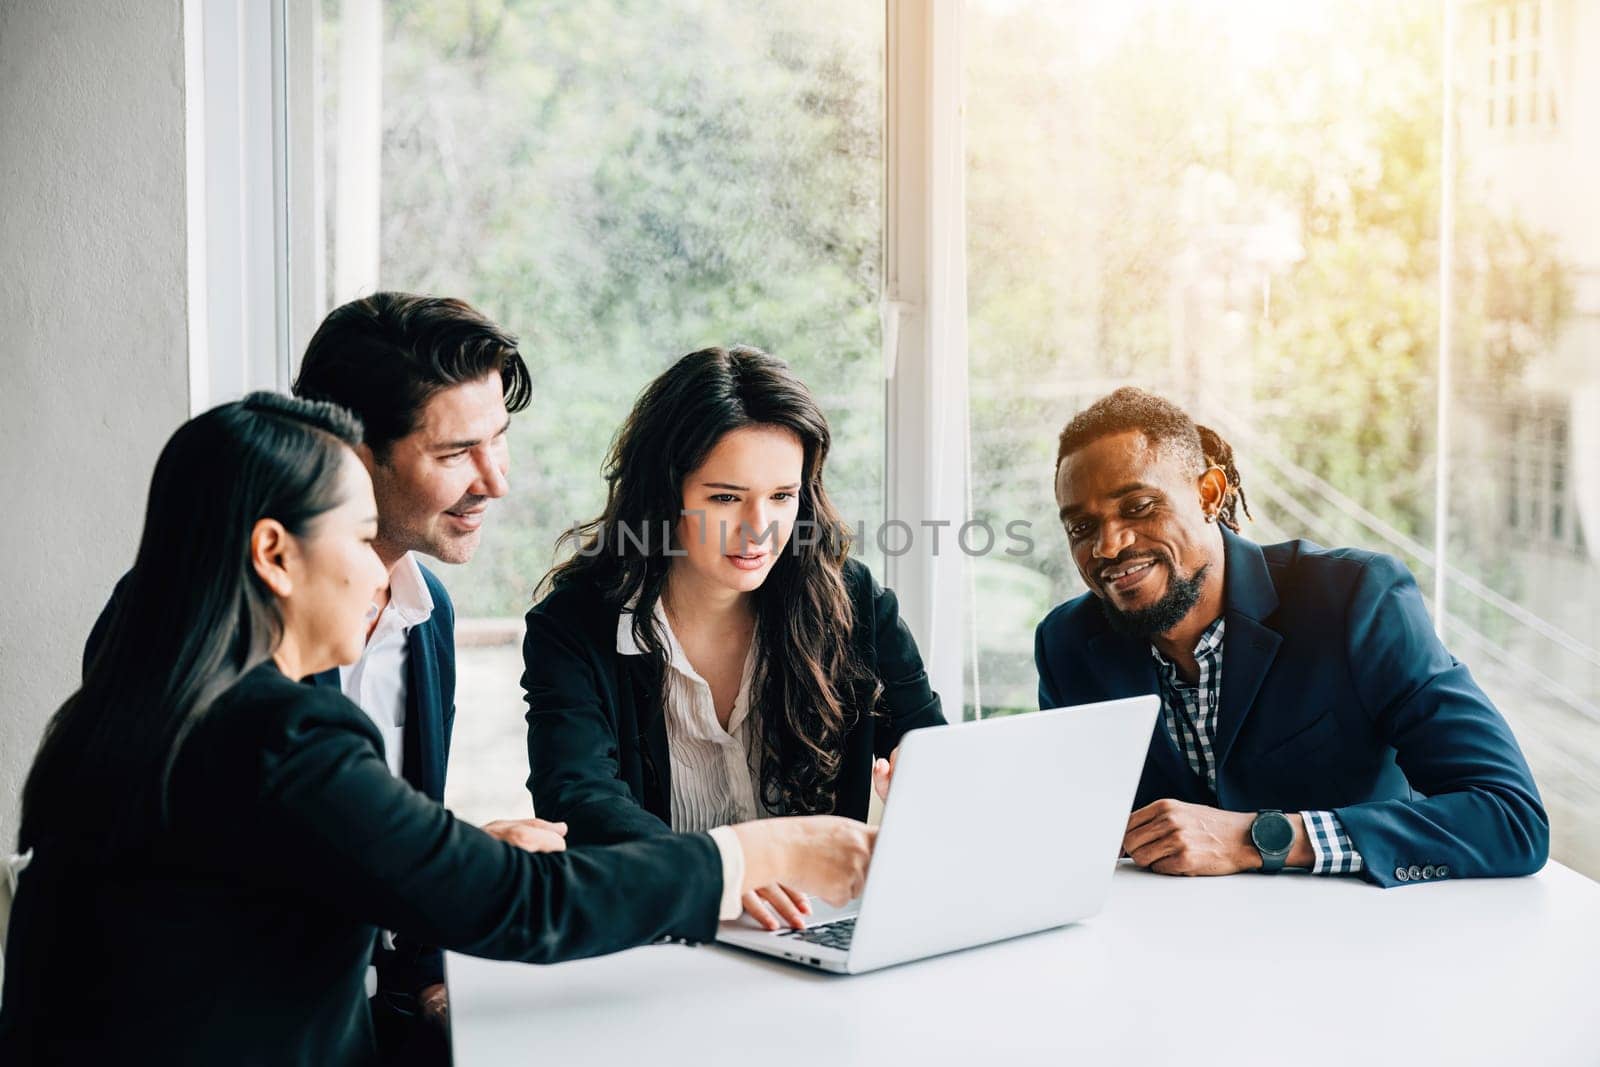 Diverse business team, including both men and women, collaborates in meeting room using laptop. Their teamwork, diversity and cooperation are evident as they discuss, plan, and strategize for success. by Sorapop